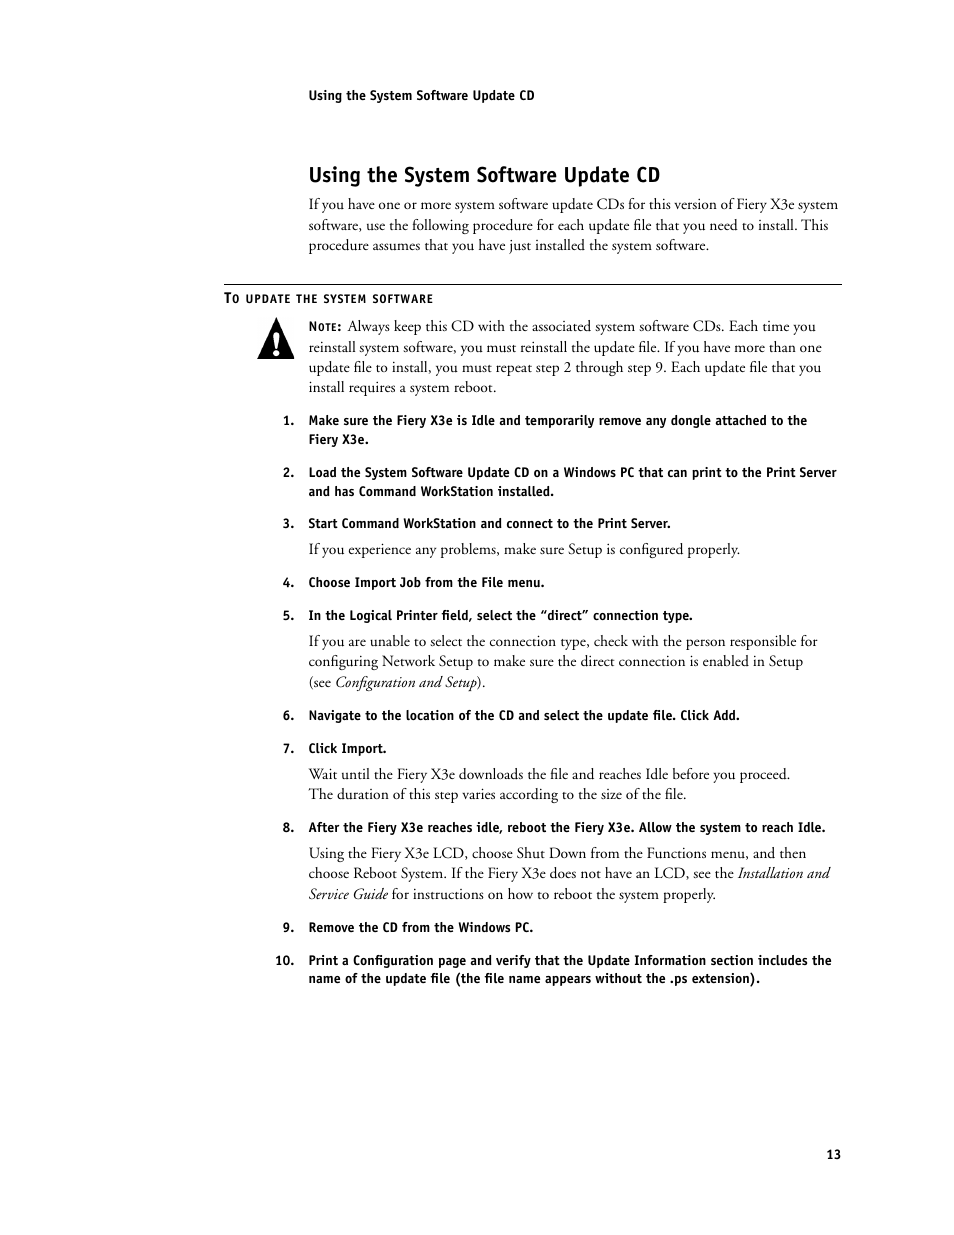 Using the system software update cd | Konica Minolta IC-402 User Manual | Page 13 / 14